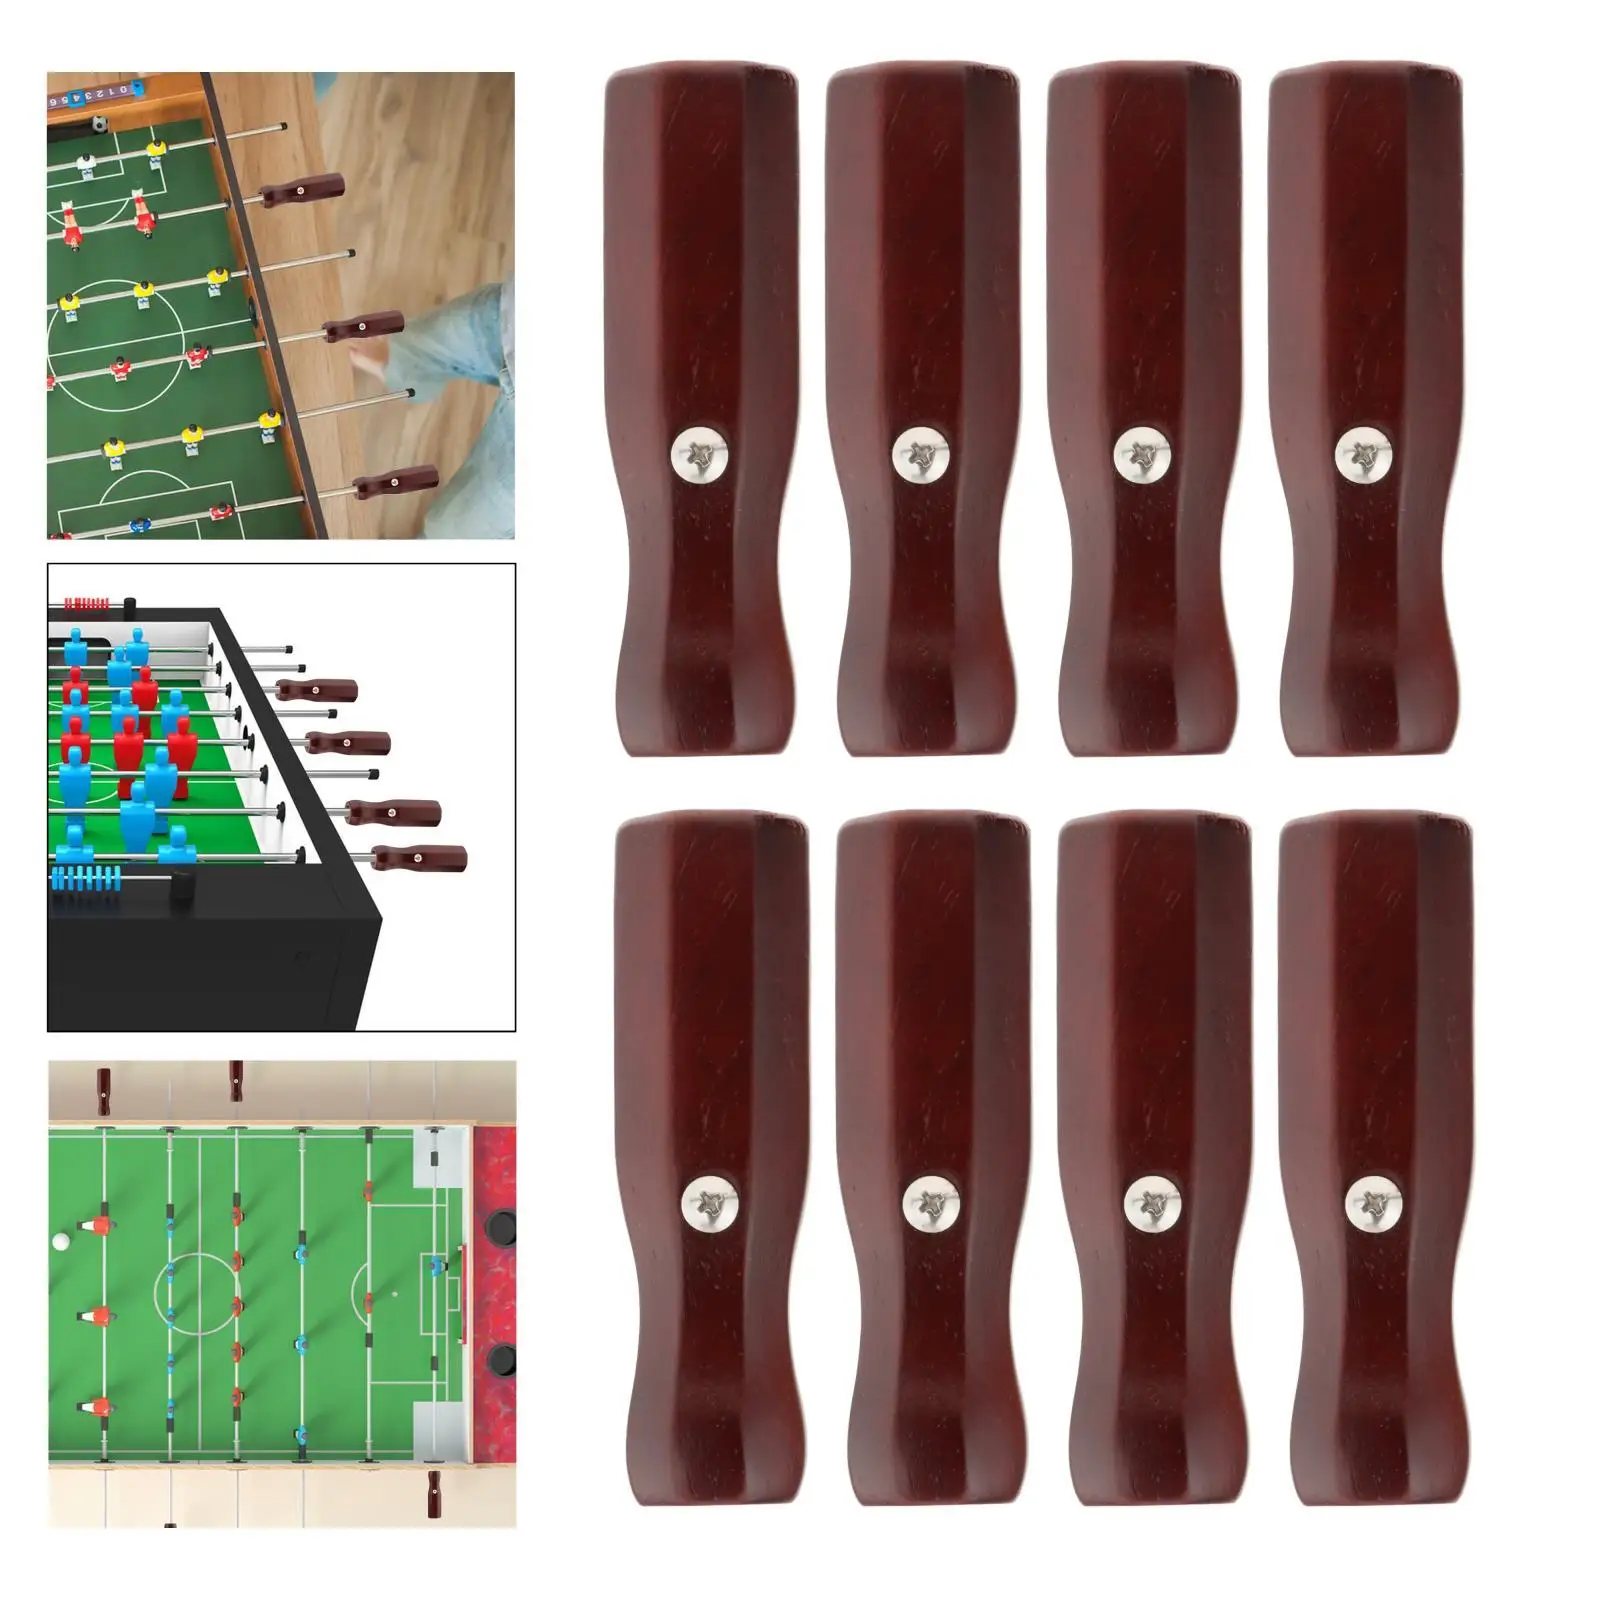 8x Foosball Table Rod End Caps 16mm Hole Table Game Soccer Table Handles